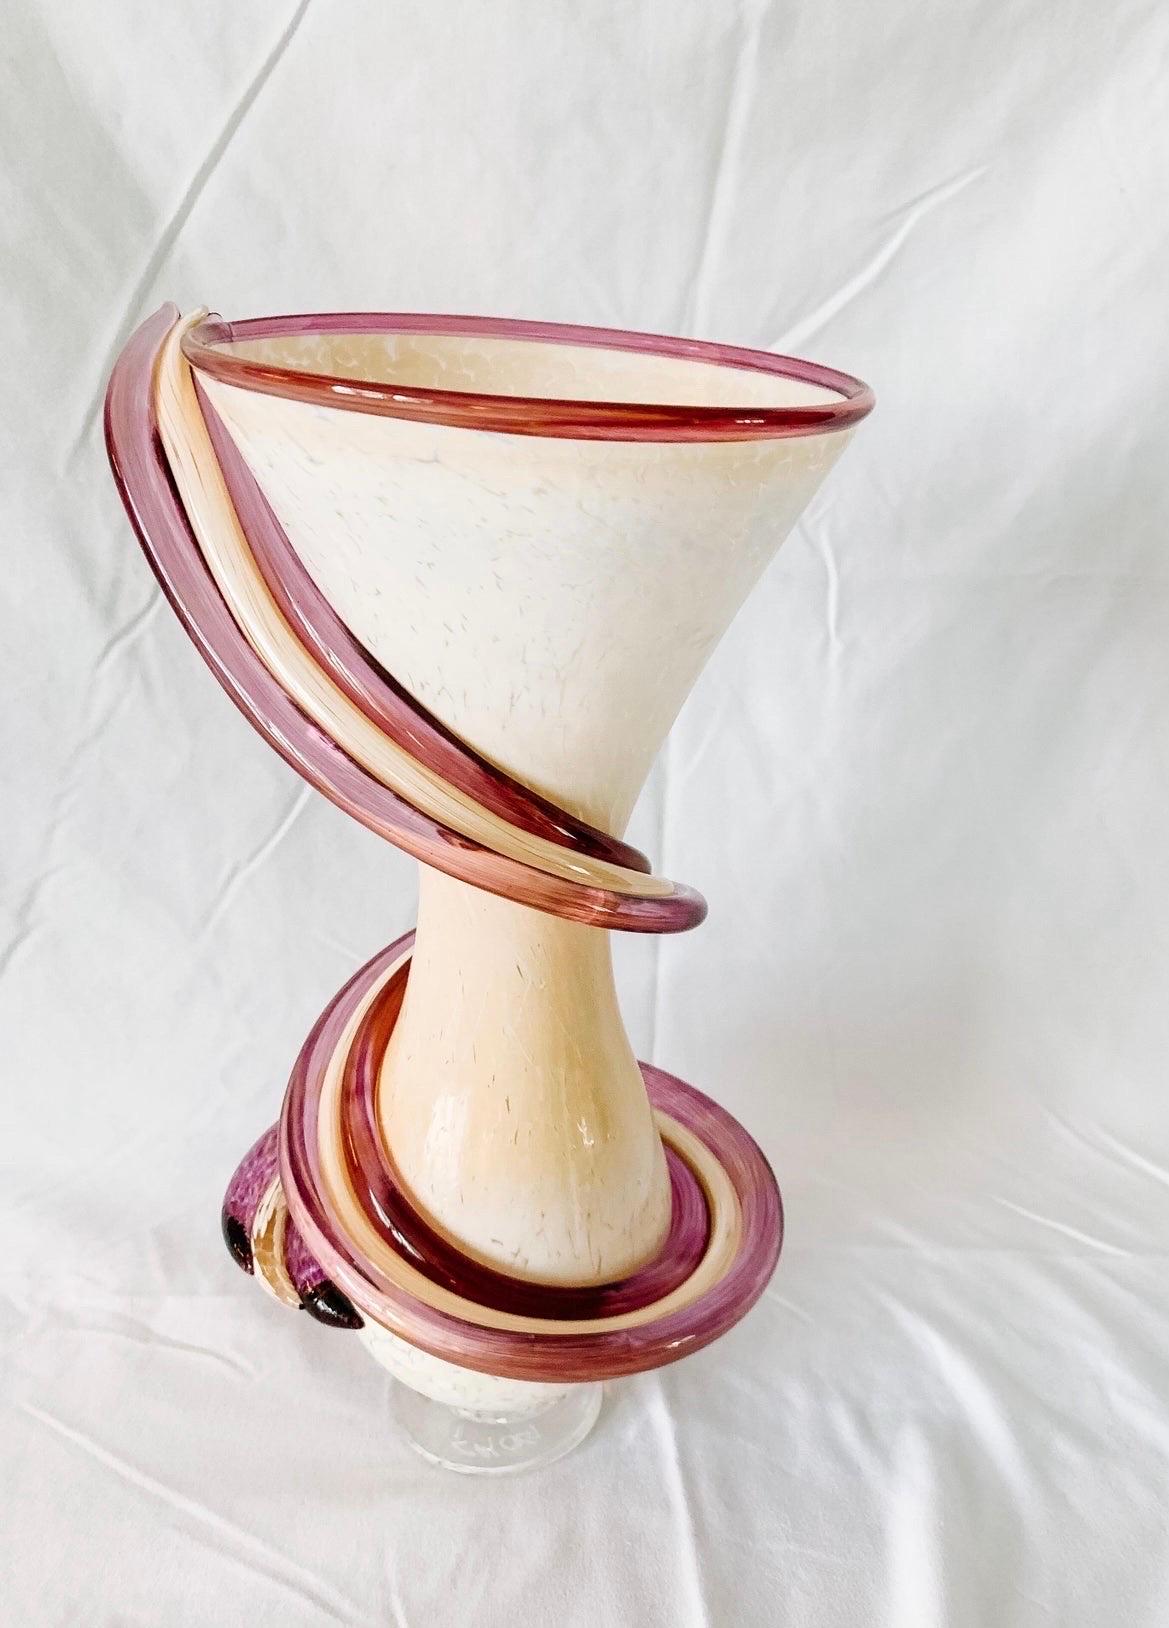 Beautiful murano style art glass vase. Signed Chog 2012. No flaws. White, cream and purple make up this beautiful piece for you art glass collection.